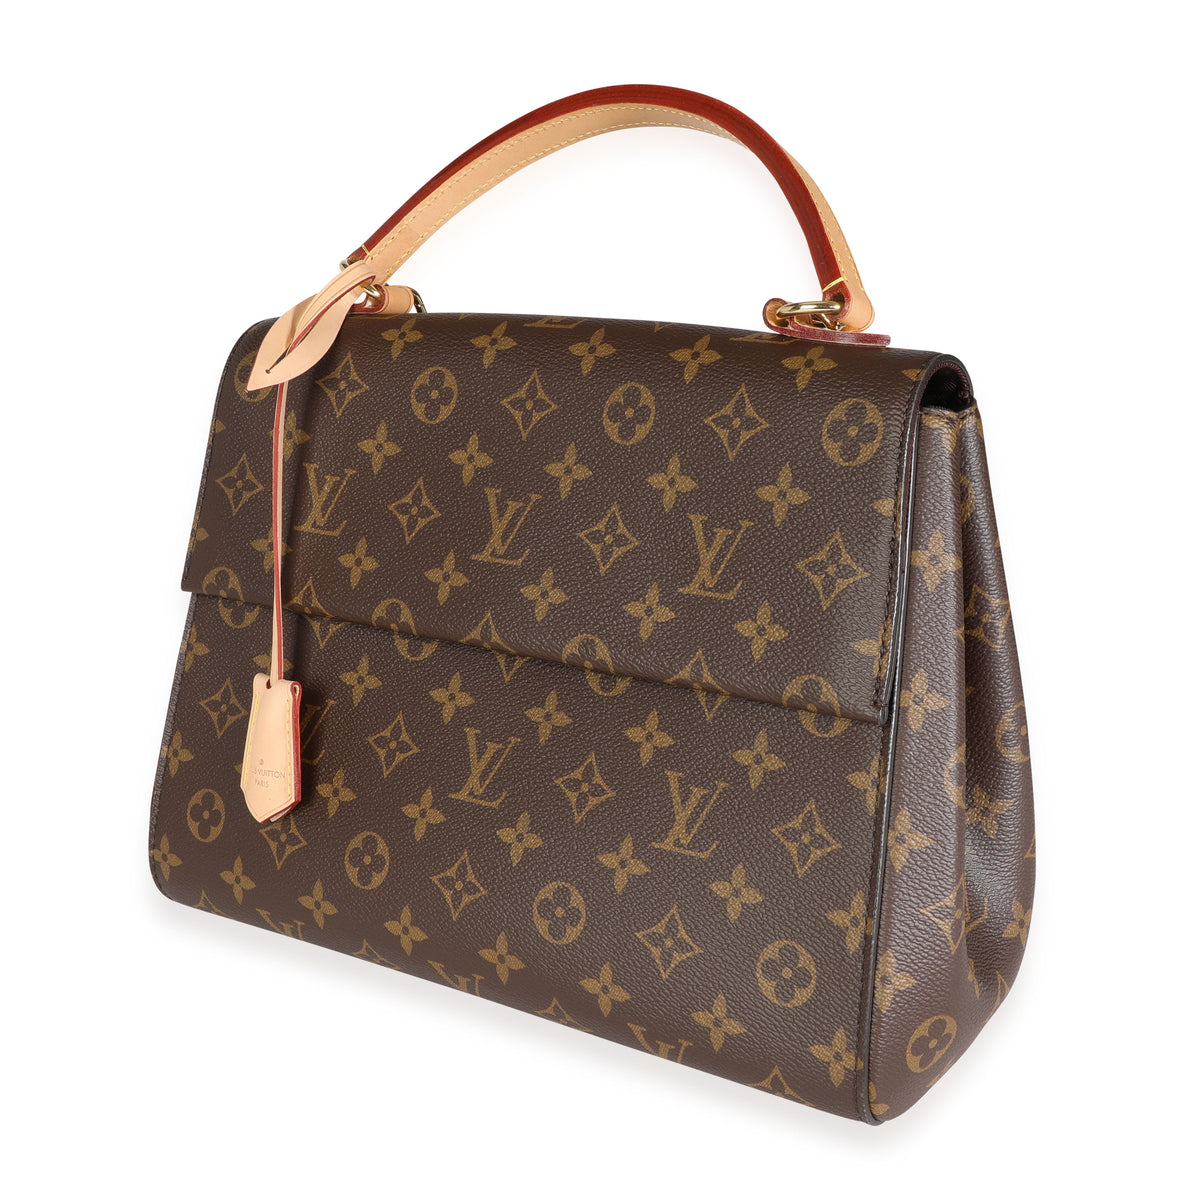 CLUNY MM Monogram Canvas in Women's Handbags collections by Louis Vuitton